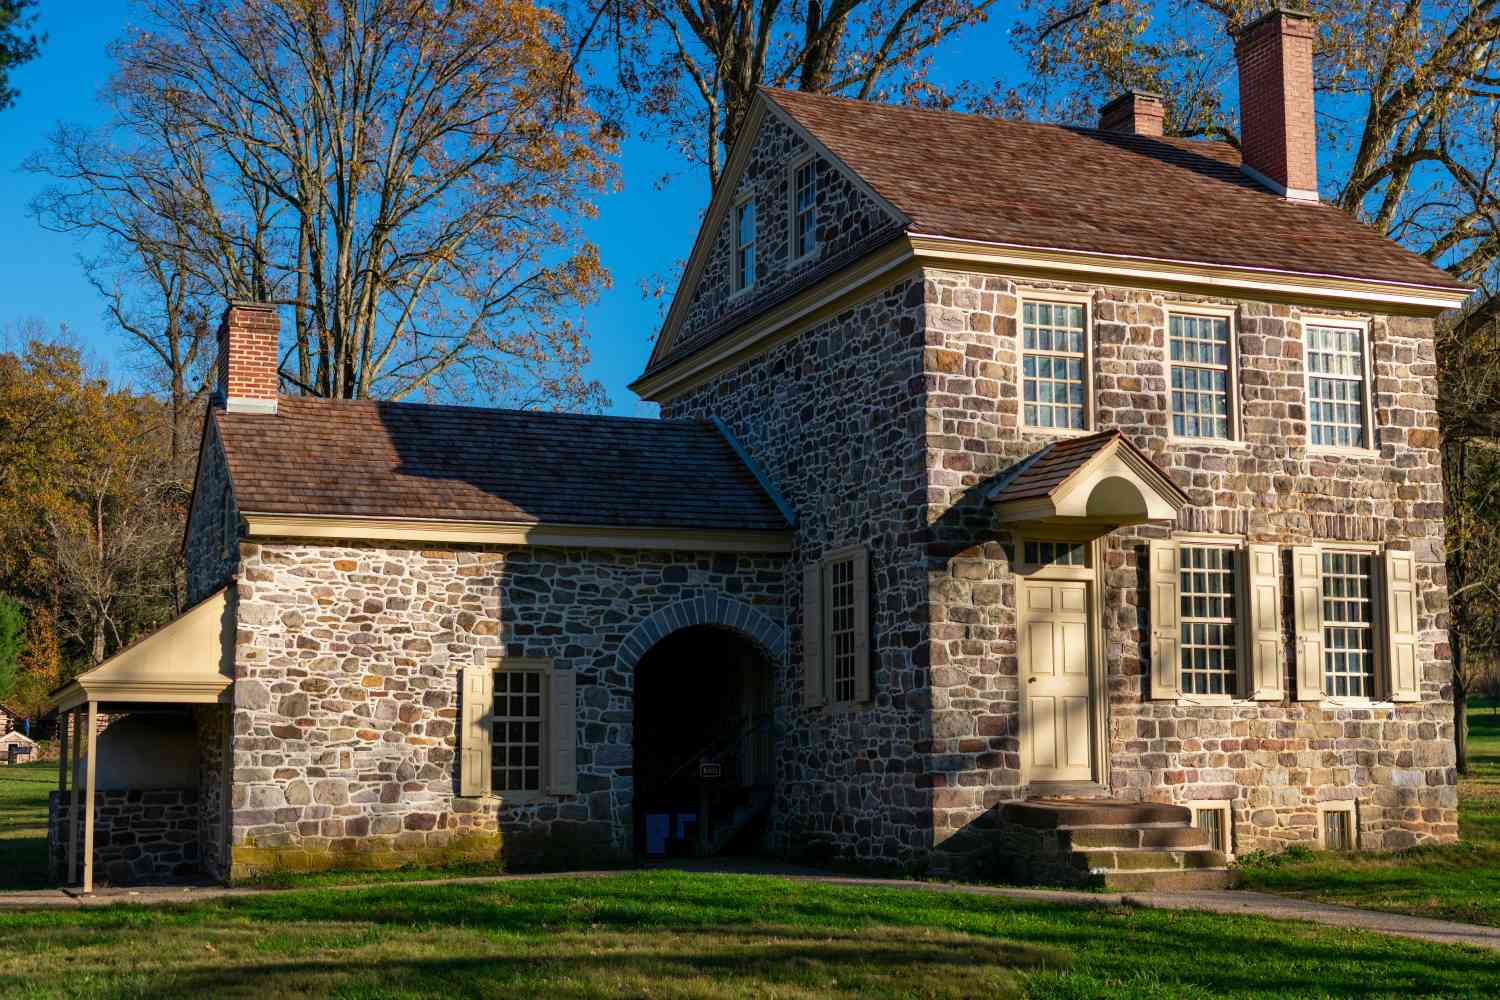 What happened at Valley Forge, and why was it significant?